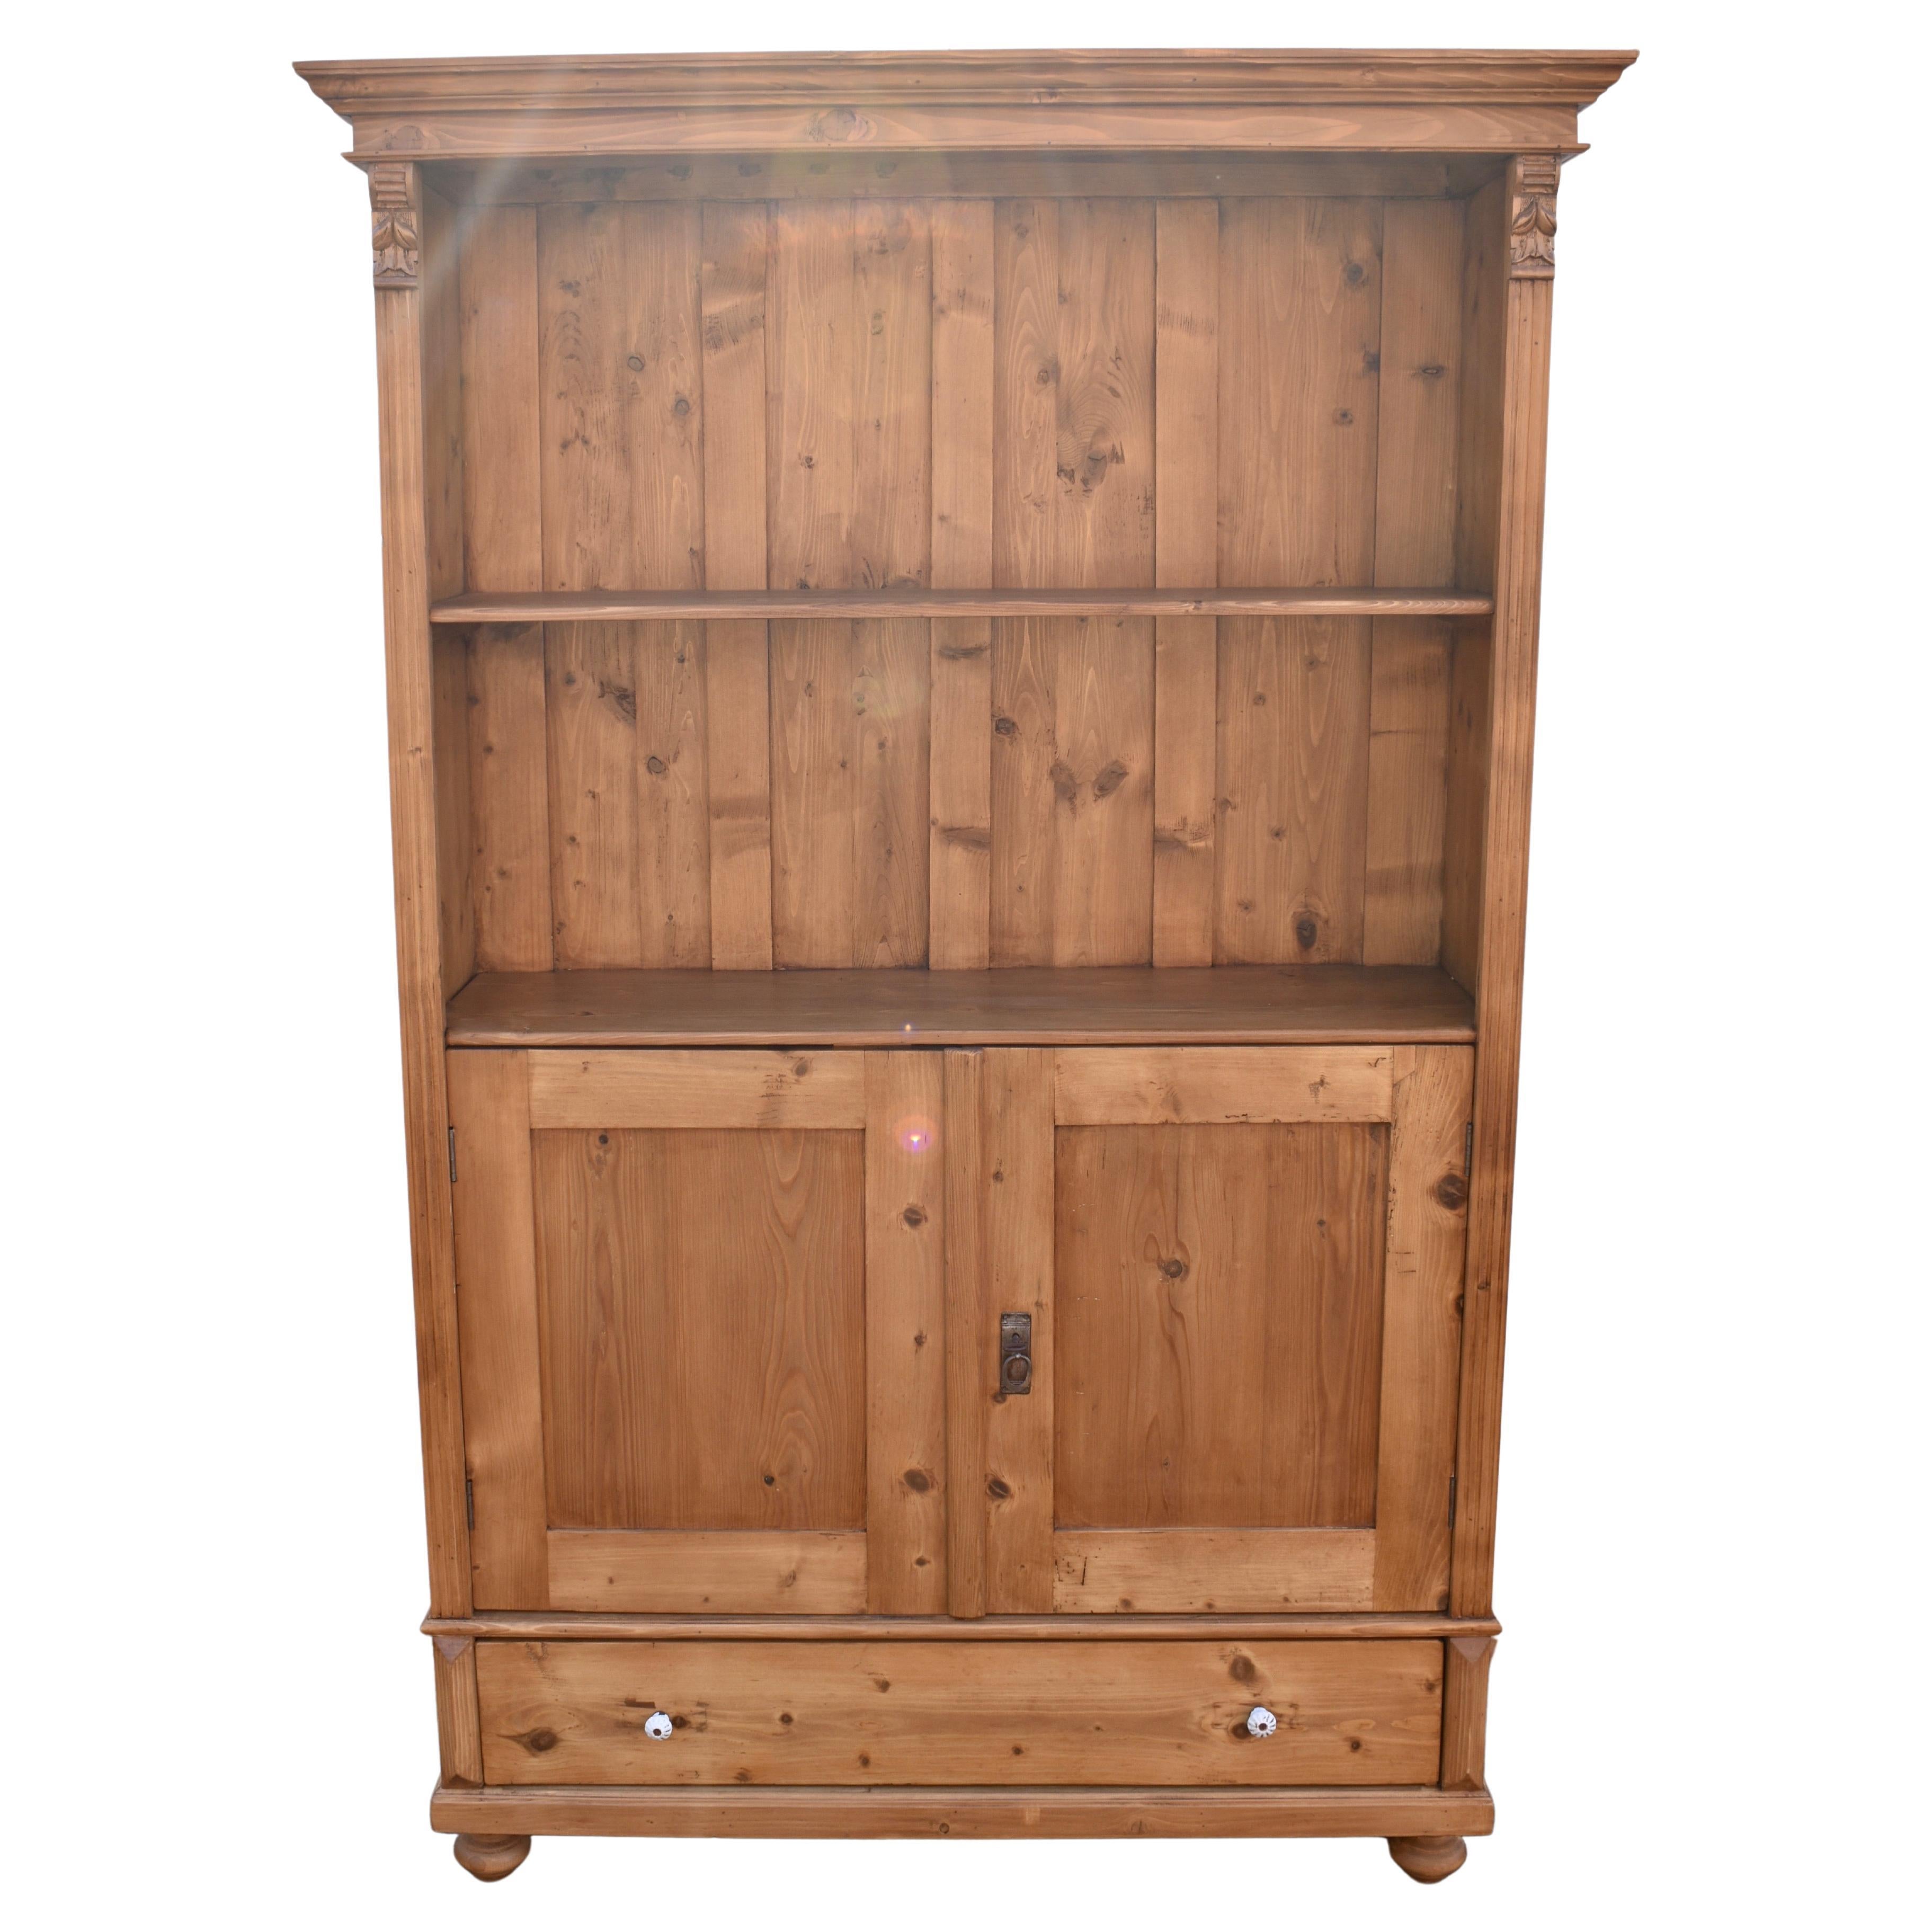 Vintage Pine Bookcase with Half Doors from Armoire